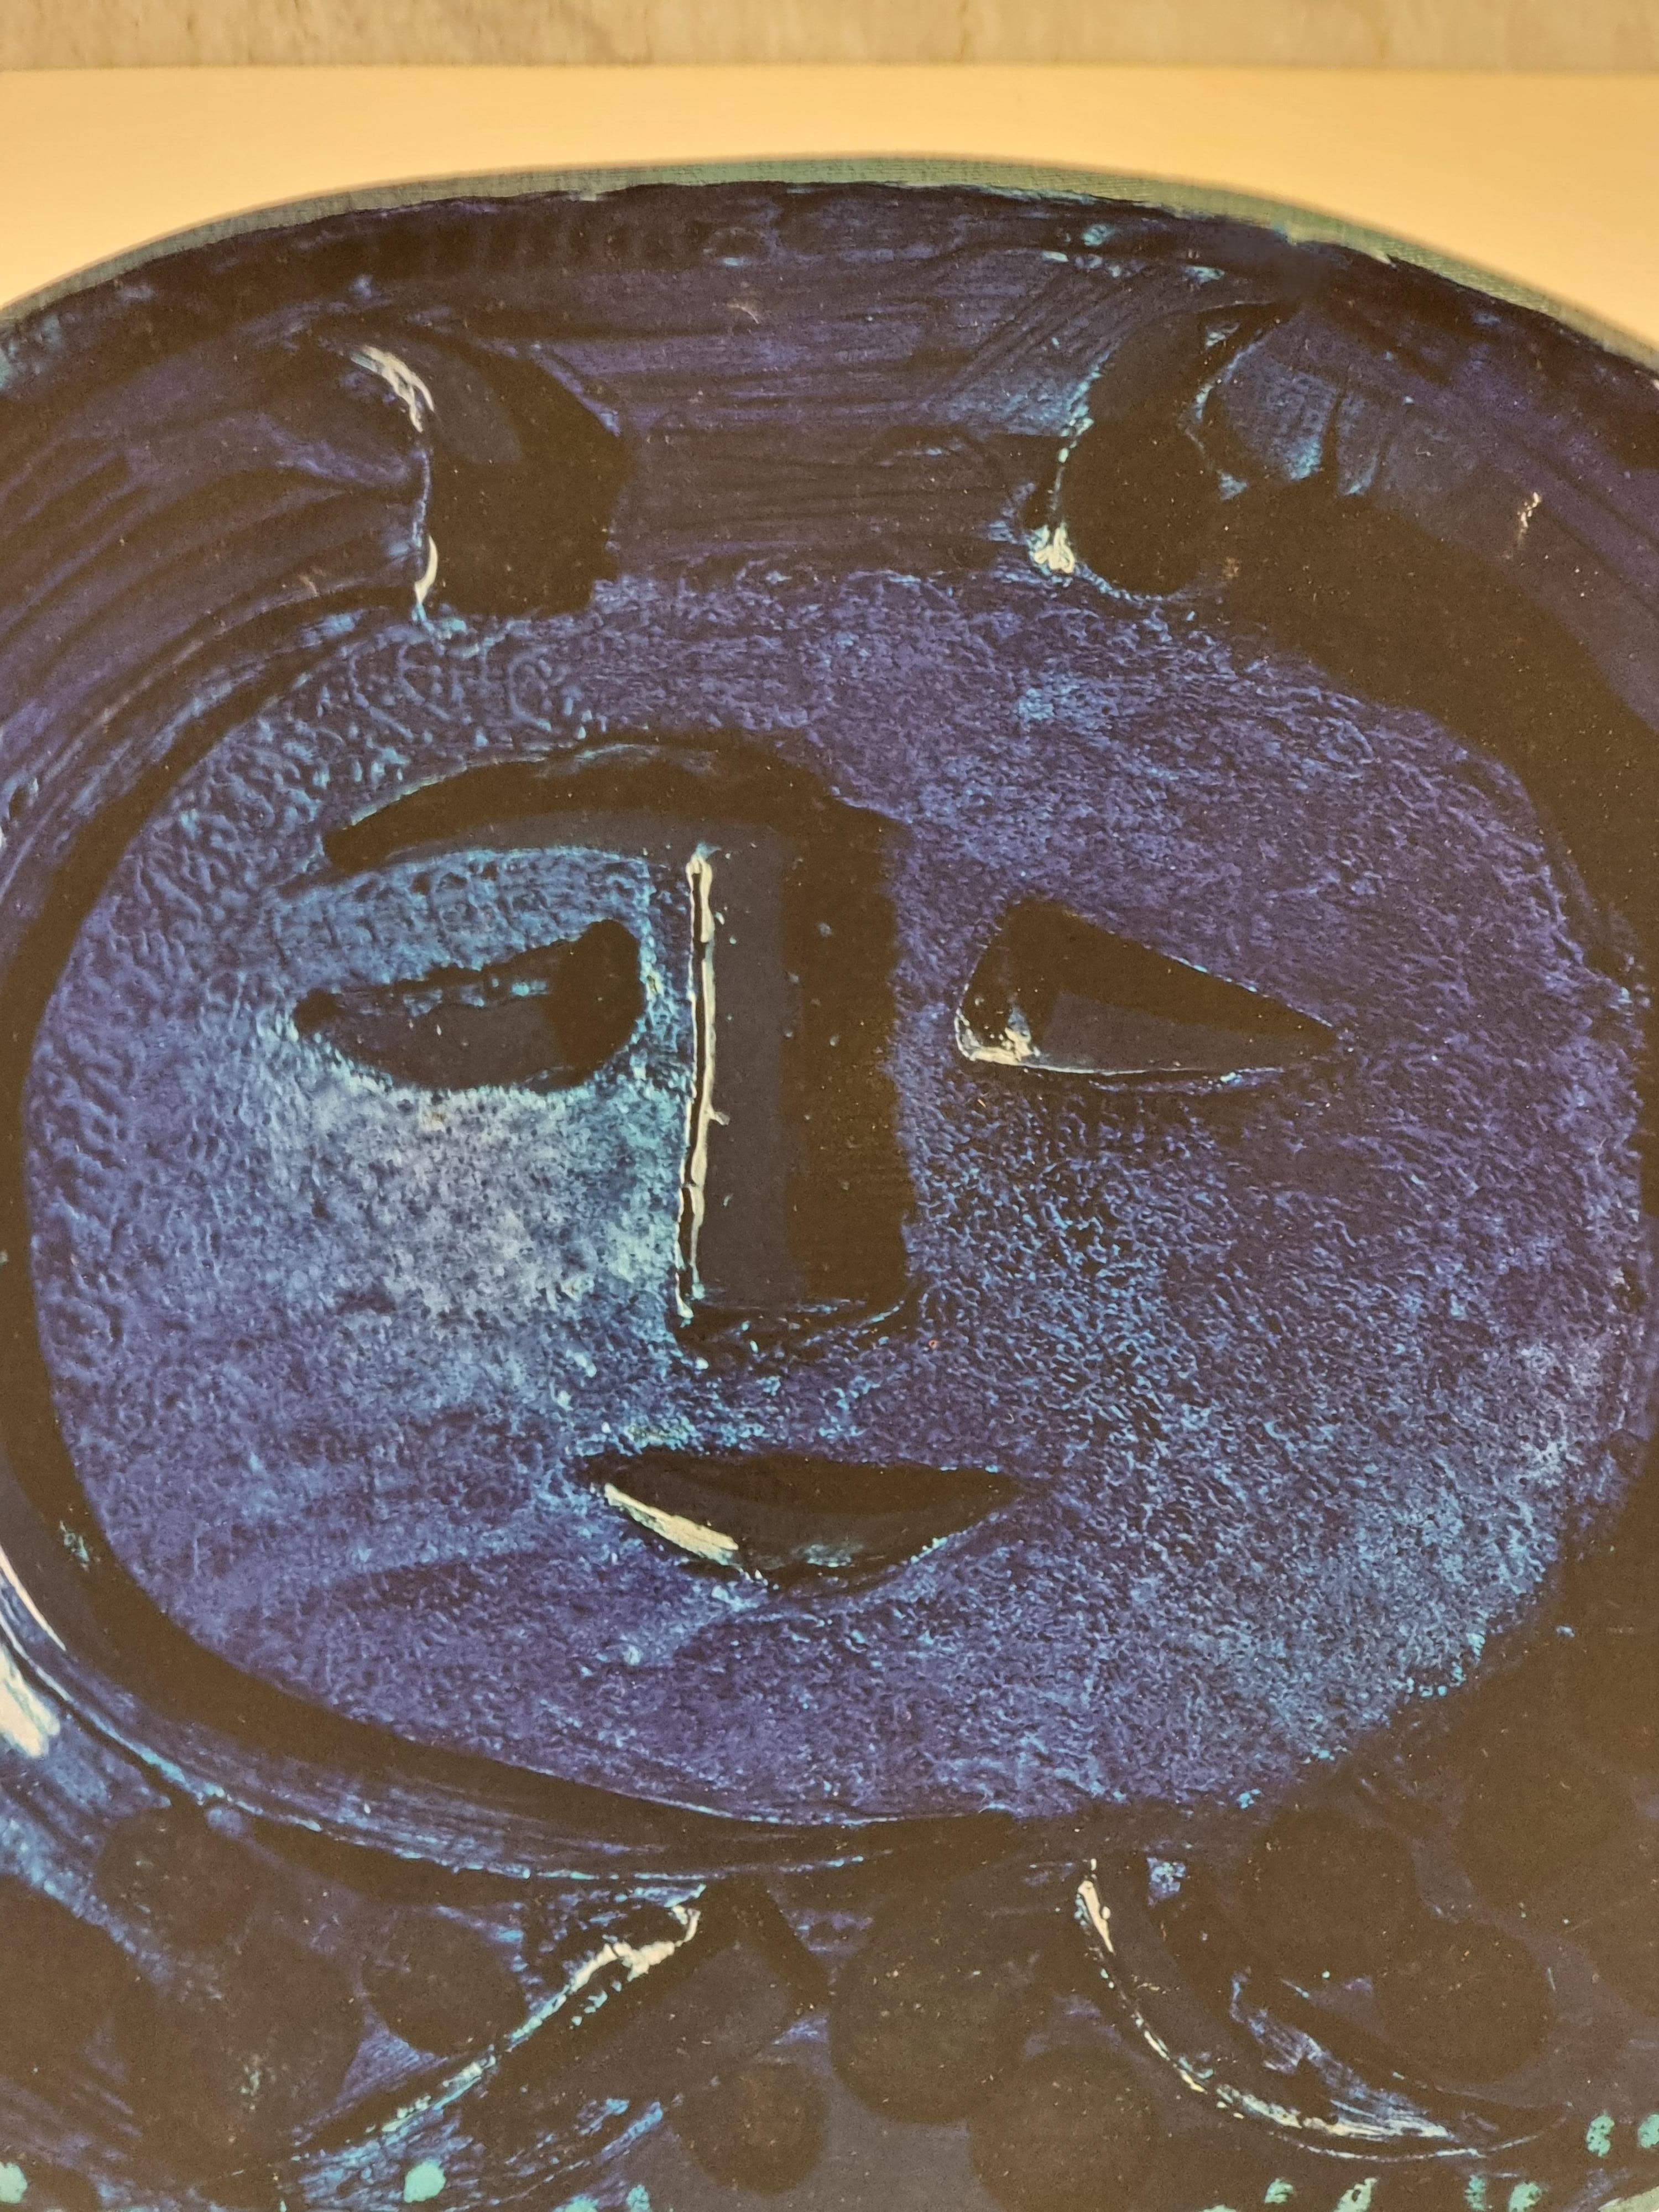 An exquisite shiny polychrome print of Picasso Vallauris ceramic plate depicting face in blue. The color print is attached to a thick, high quality paper with decorative lines. 

The print is originally from a Limited Edition Art Folio 